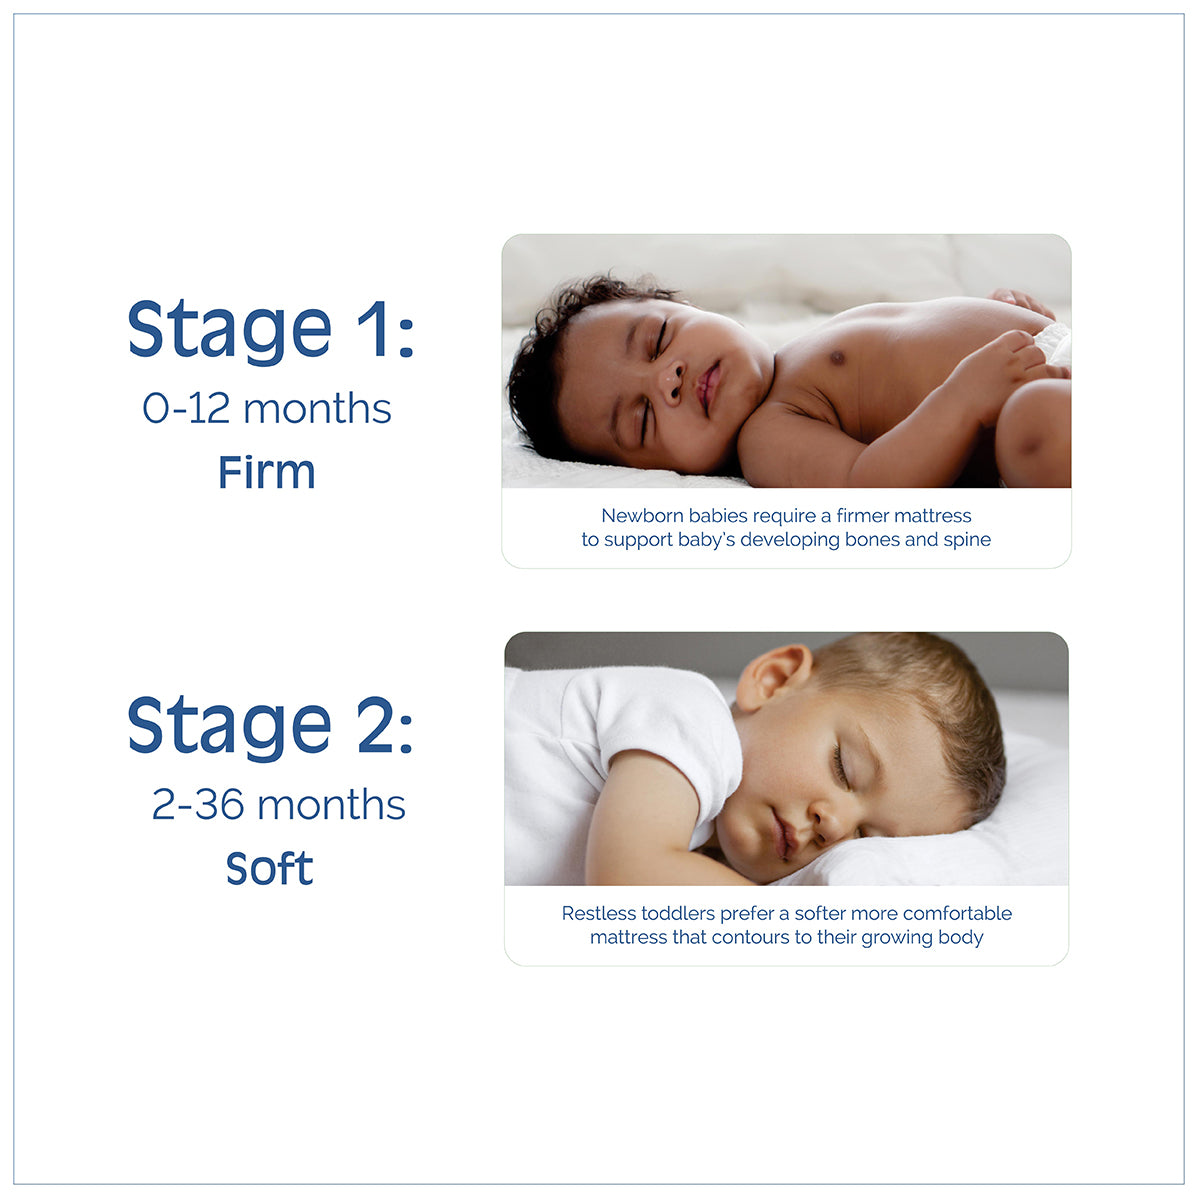 Snuggletime Bamboo 2 Stage Orthopaedic Support Mattress